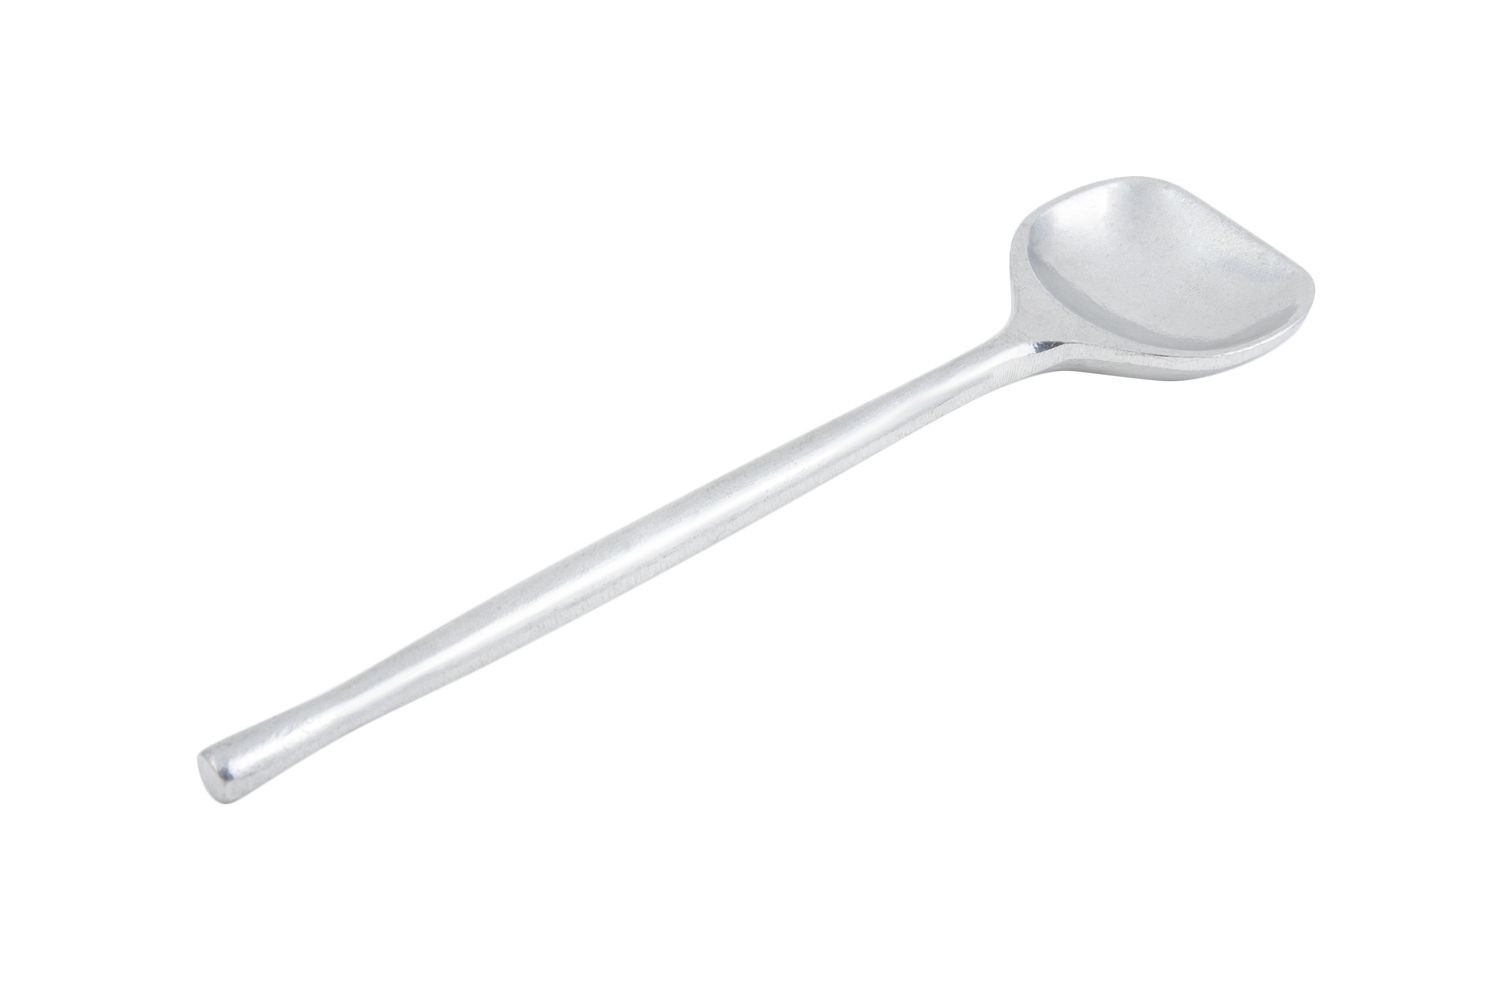 Bon Chef 9085P Salad Serving Spoon, Pewter Glo 11 1/2", Set of 6